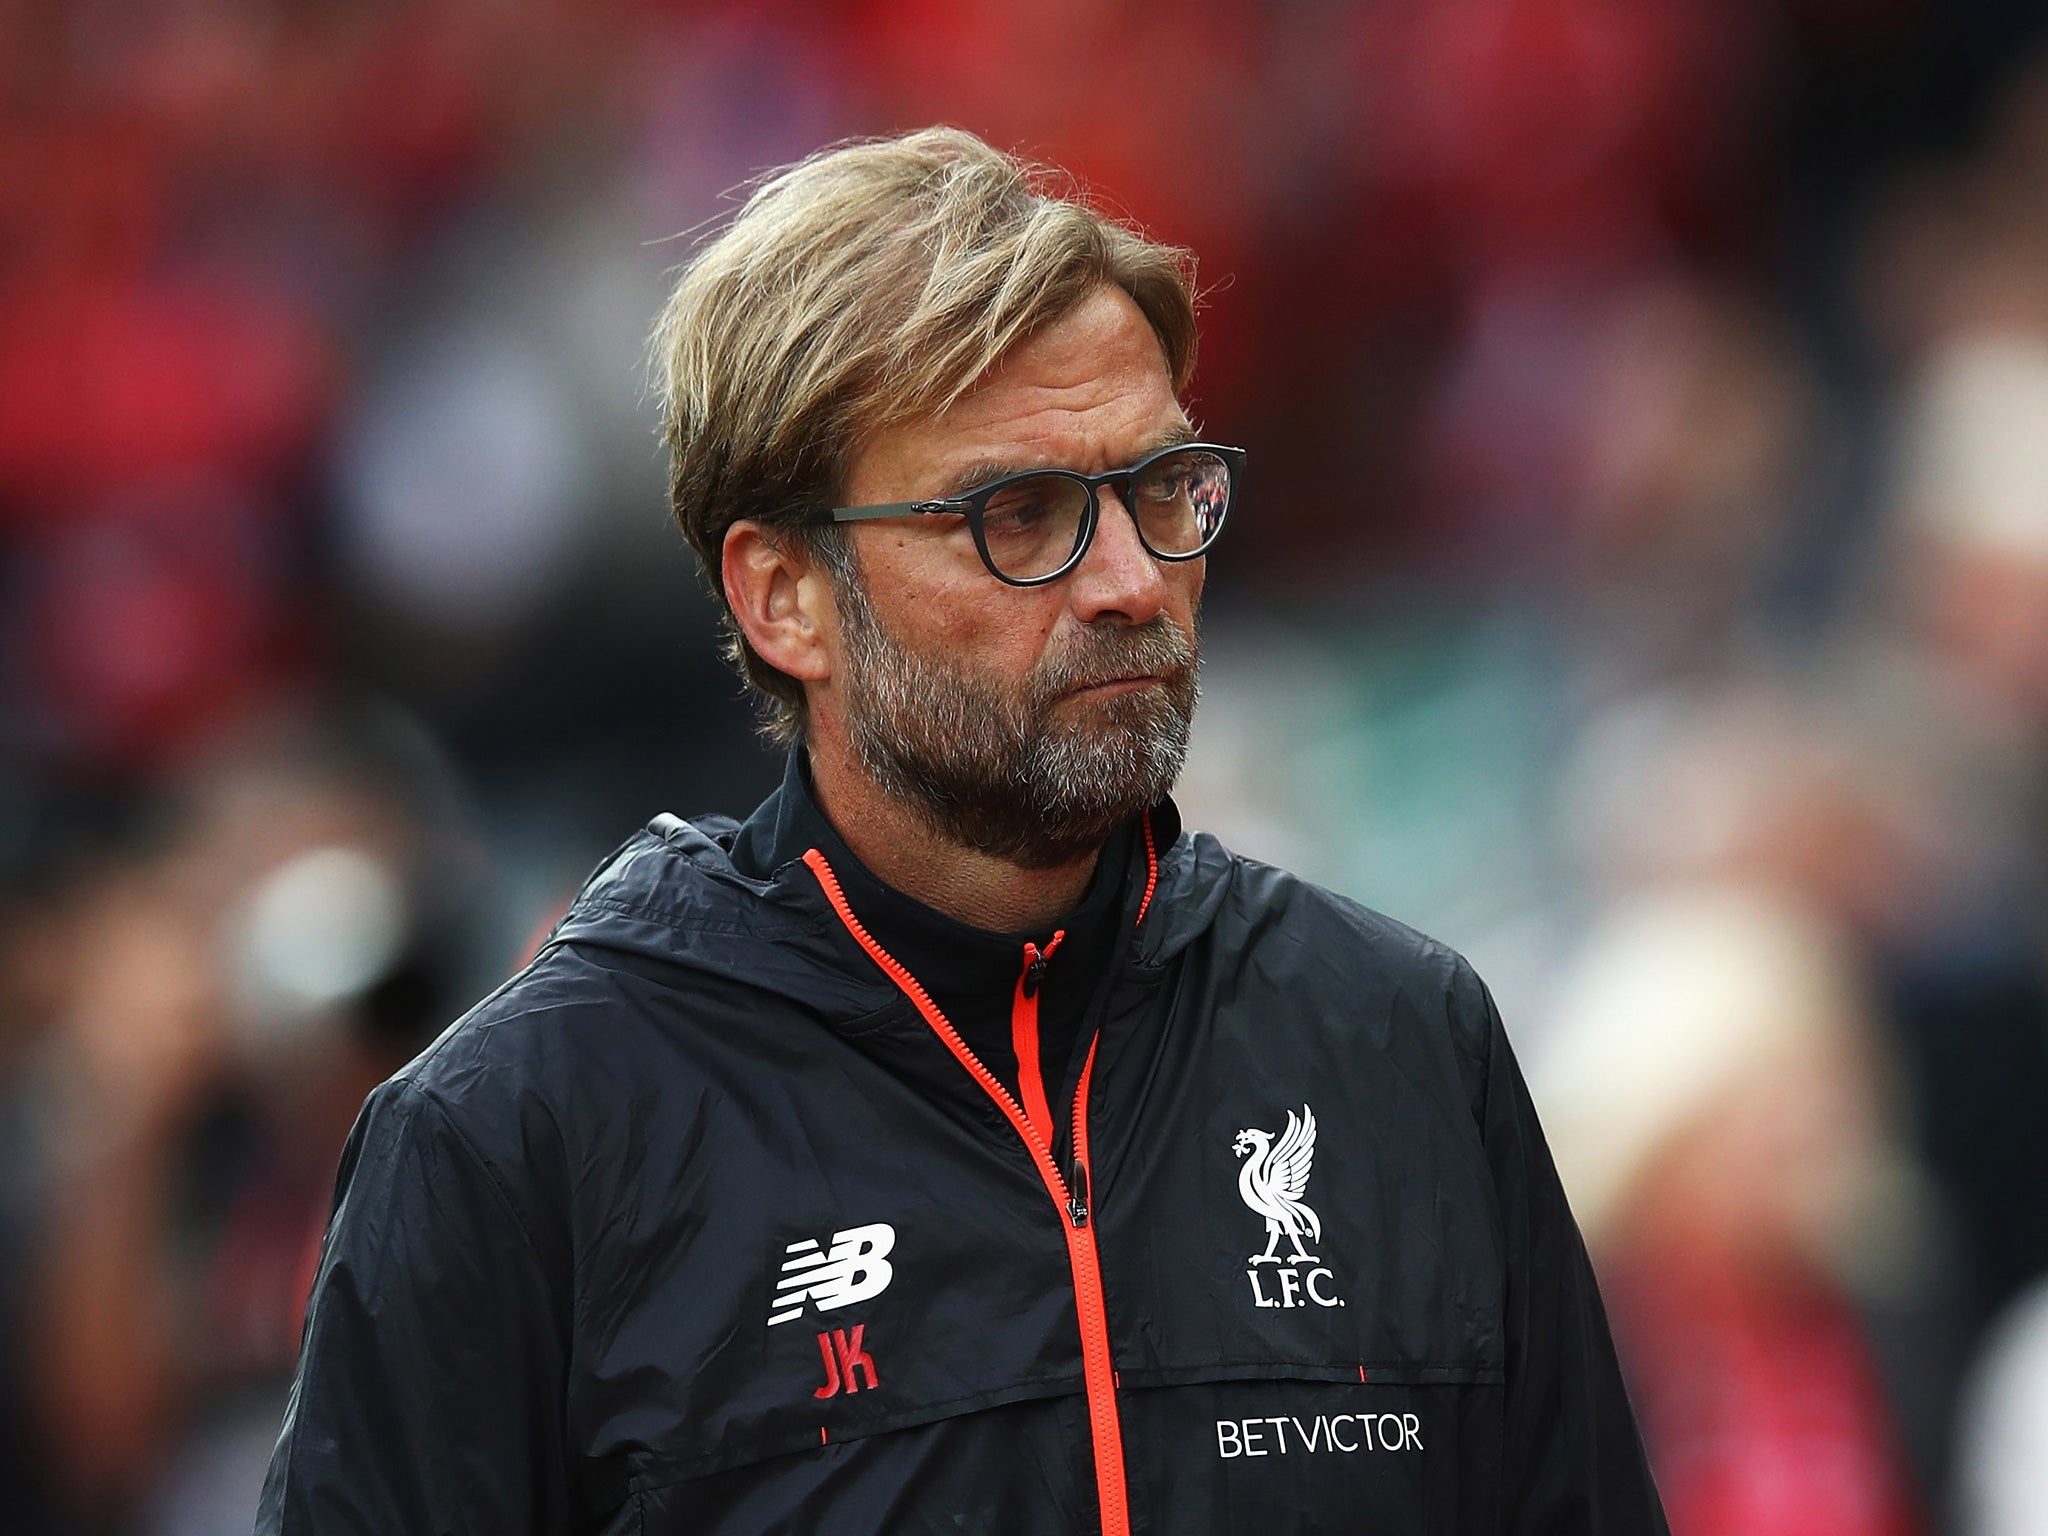 Klopp would only describe Sakho's actions as 'not positive'